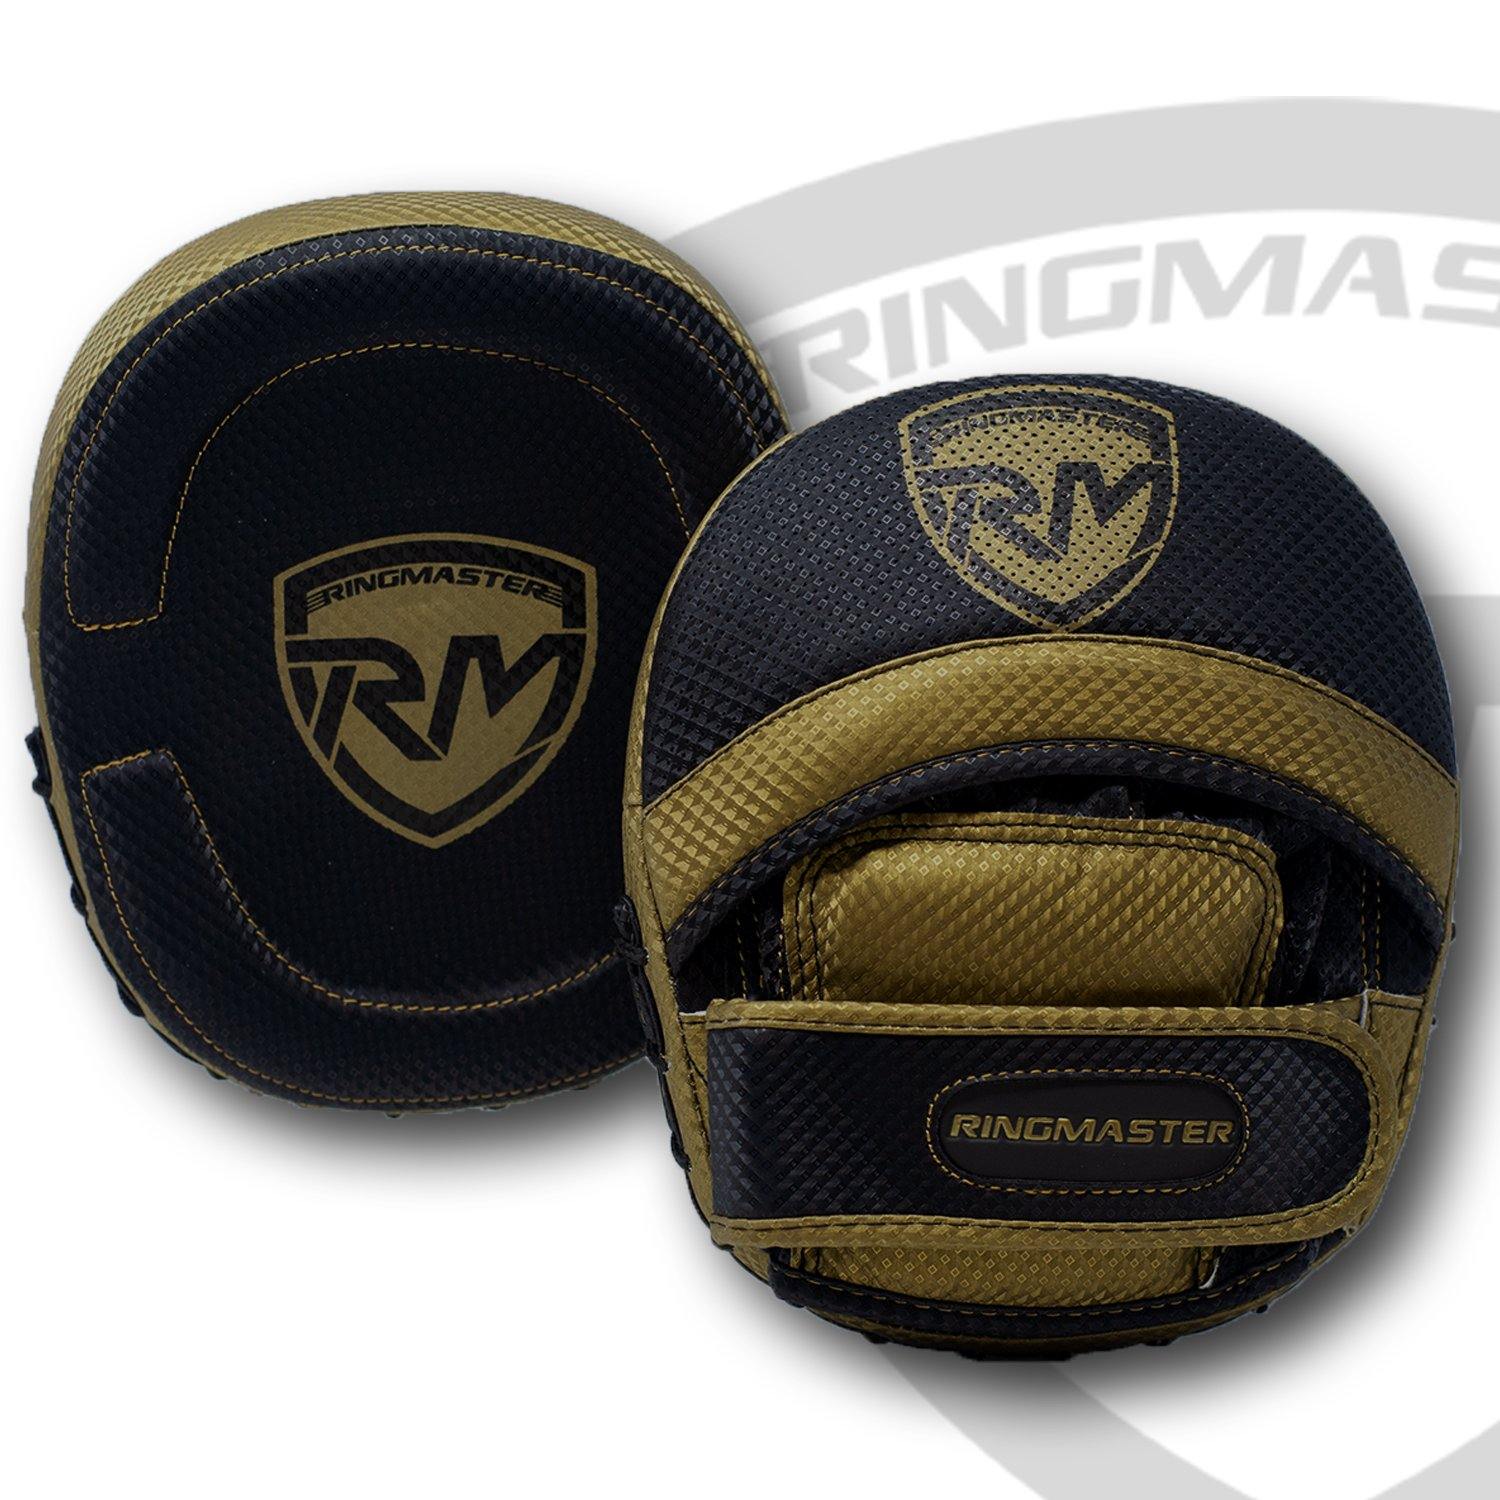 Hook and Jab Pads, boxing pads, punching pad, focus pads, kickboxing pads, focus pads boxing, boxing pad price, focus mitts, sparring pads, boxing gloves and pads, Ringmaster Sports Boxing Equipment, Ringmaster Sports Boxing pads, Cobra X2 Series Compact Focus Pads Black/Gold